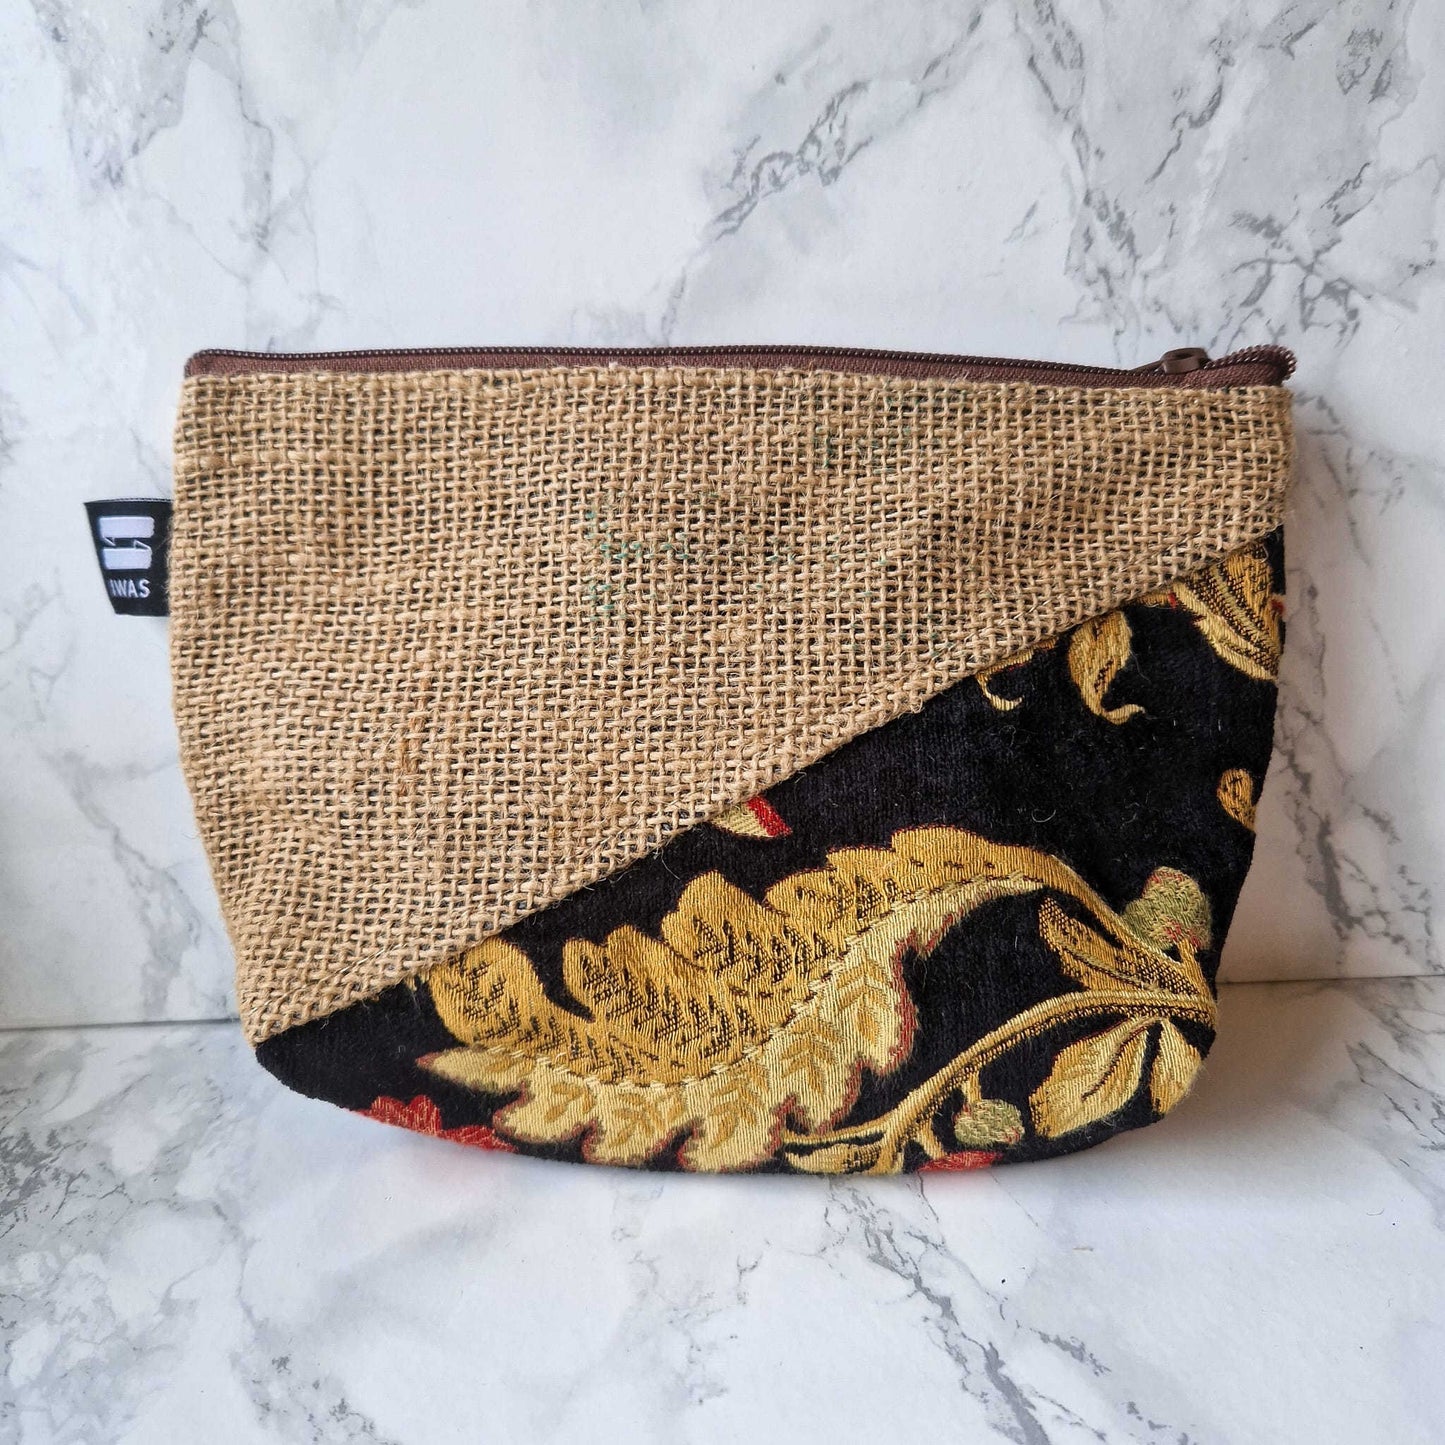 Make-up purse | Upcycled coffee bags